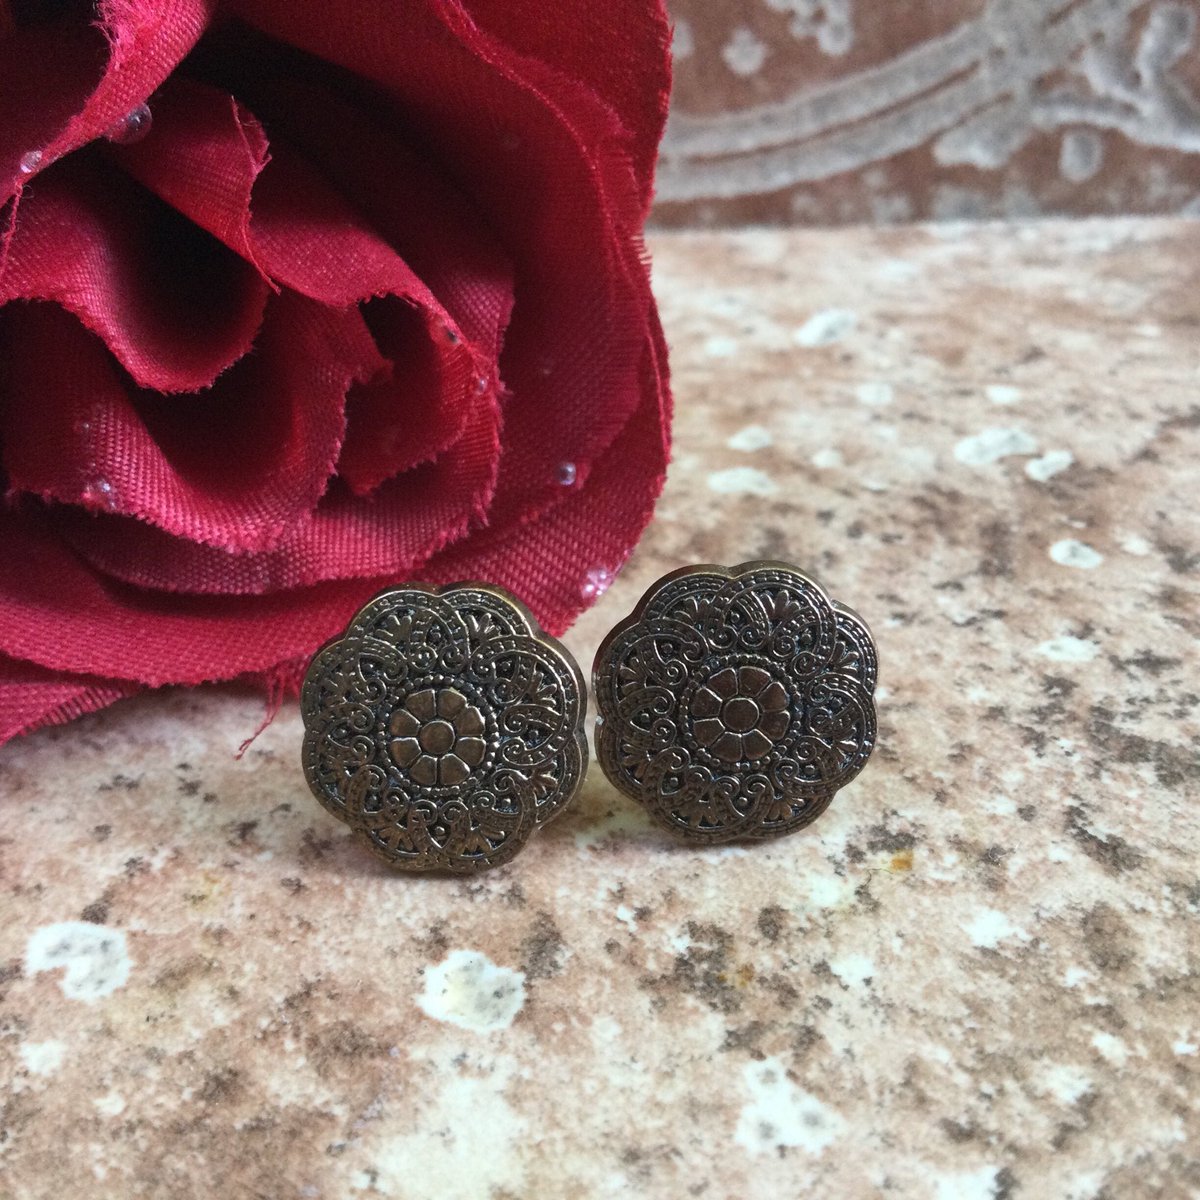 Put these gorgeous #button #studearrings on your #holidaygift list to either receive or give as a #birthdaygift, #Christmaspresent or #stockingstuffer. $9.95 includes #freeshipping. #studs #smallearrings #momgift #sustainablefashion  #minimalist #circle etsy.me/3qz7U7w